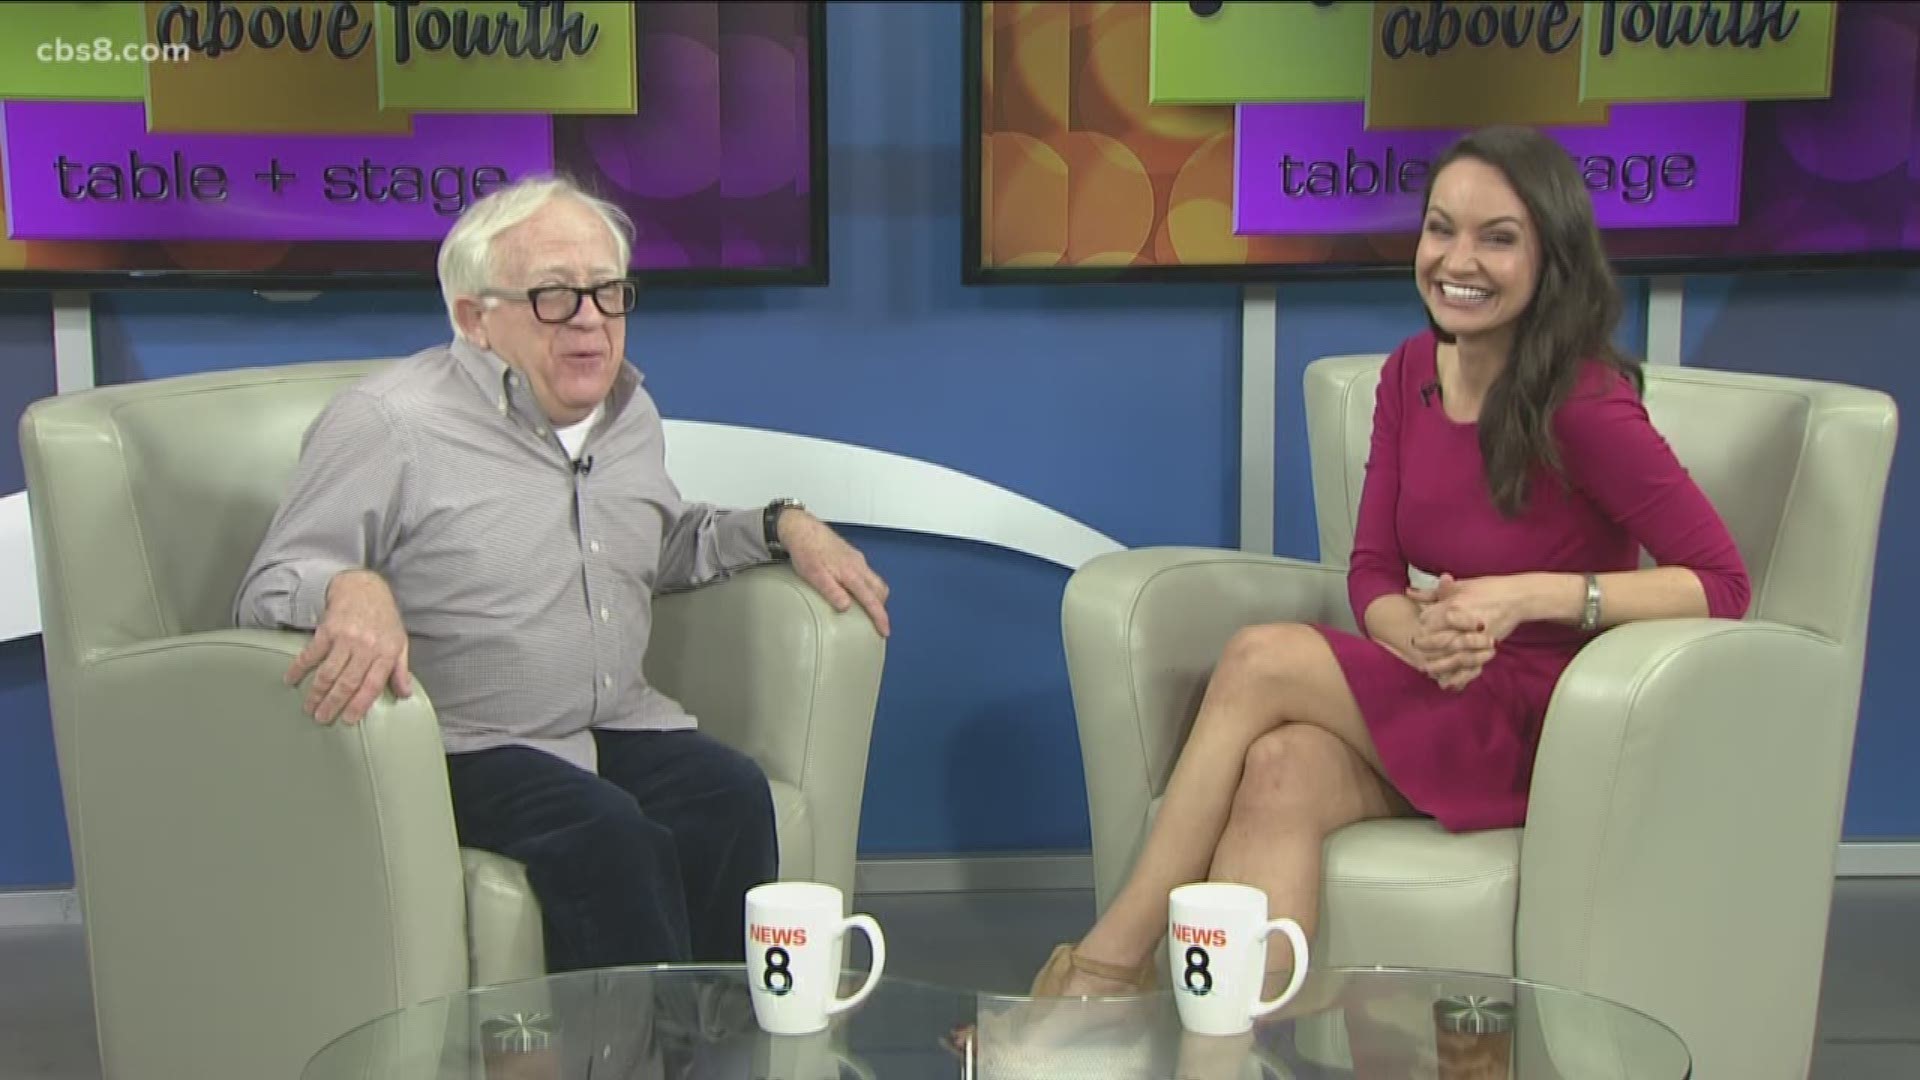 Leslie Jordan stopped by Morning Extra to talk about his shows in San Diego and how they differ from other shows across the country.